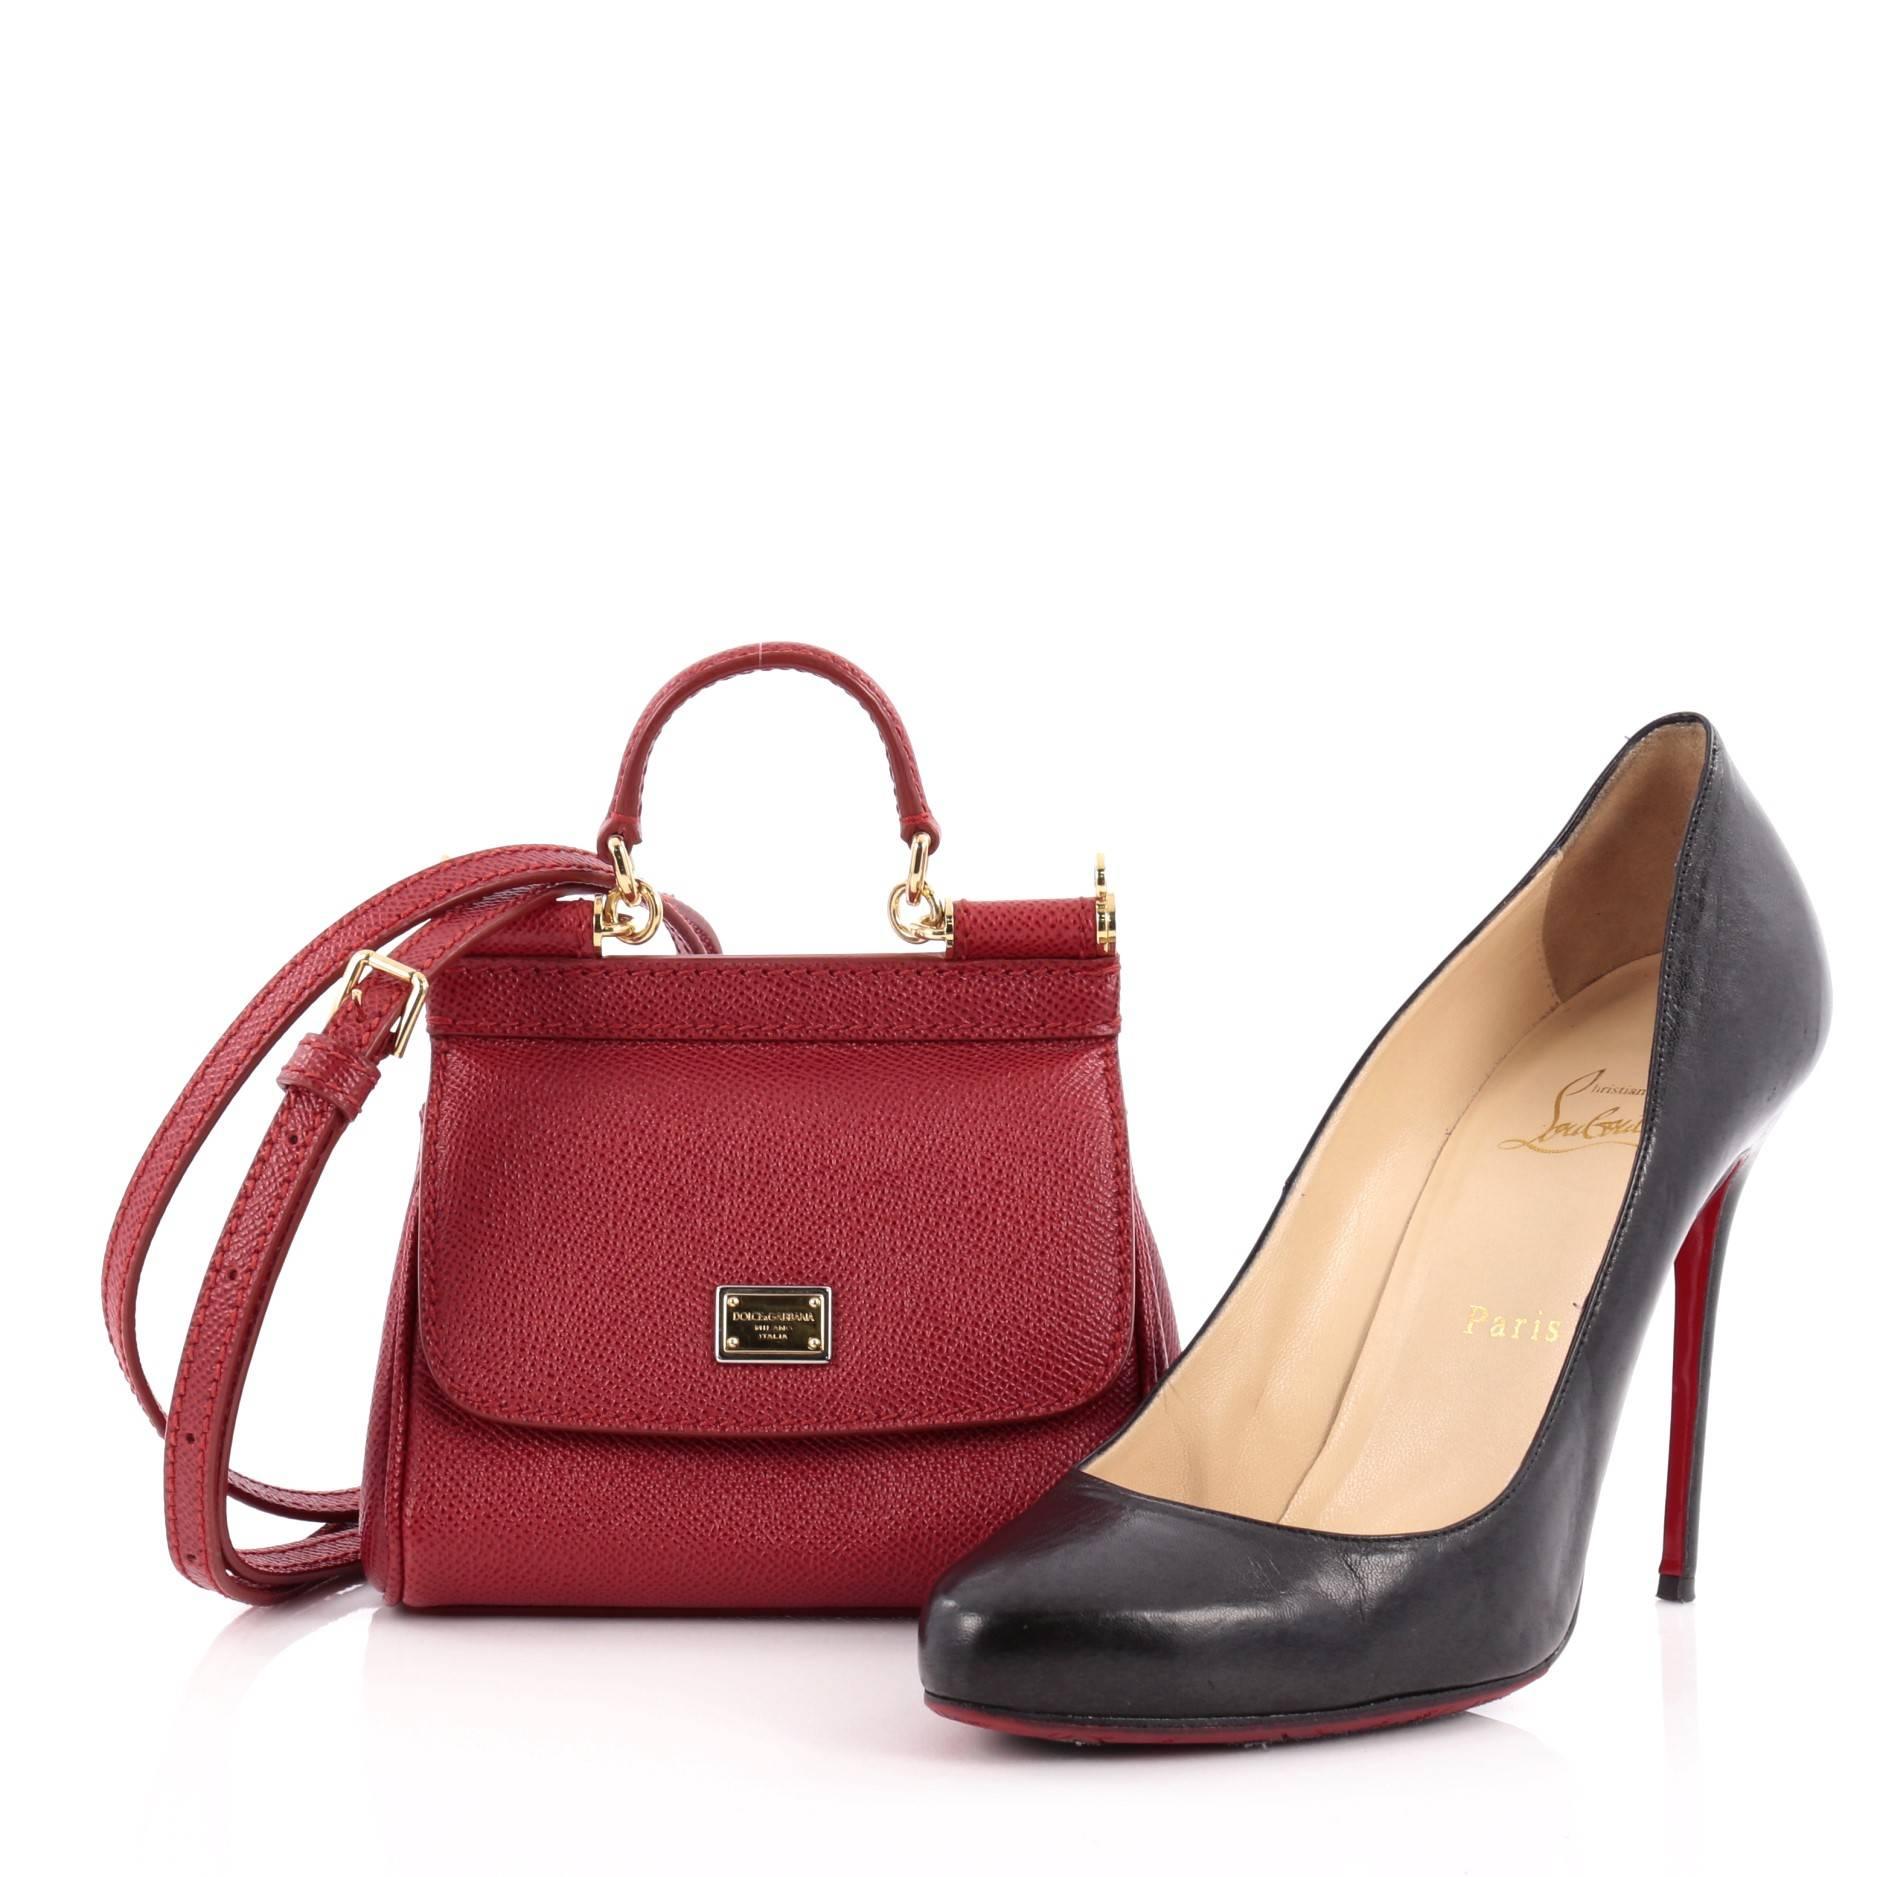 This authentic Dolce & Gabbana Miss Sicily Leather Micro pays homage to the designers' Sicilian heritage with a fresh twist. Crafted from rouge red textured leather, this miniature, petite bag features a short leather top handle, detachable shoulder